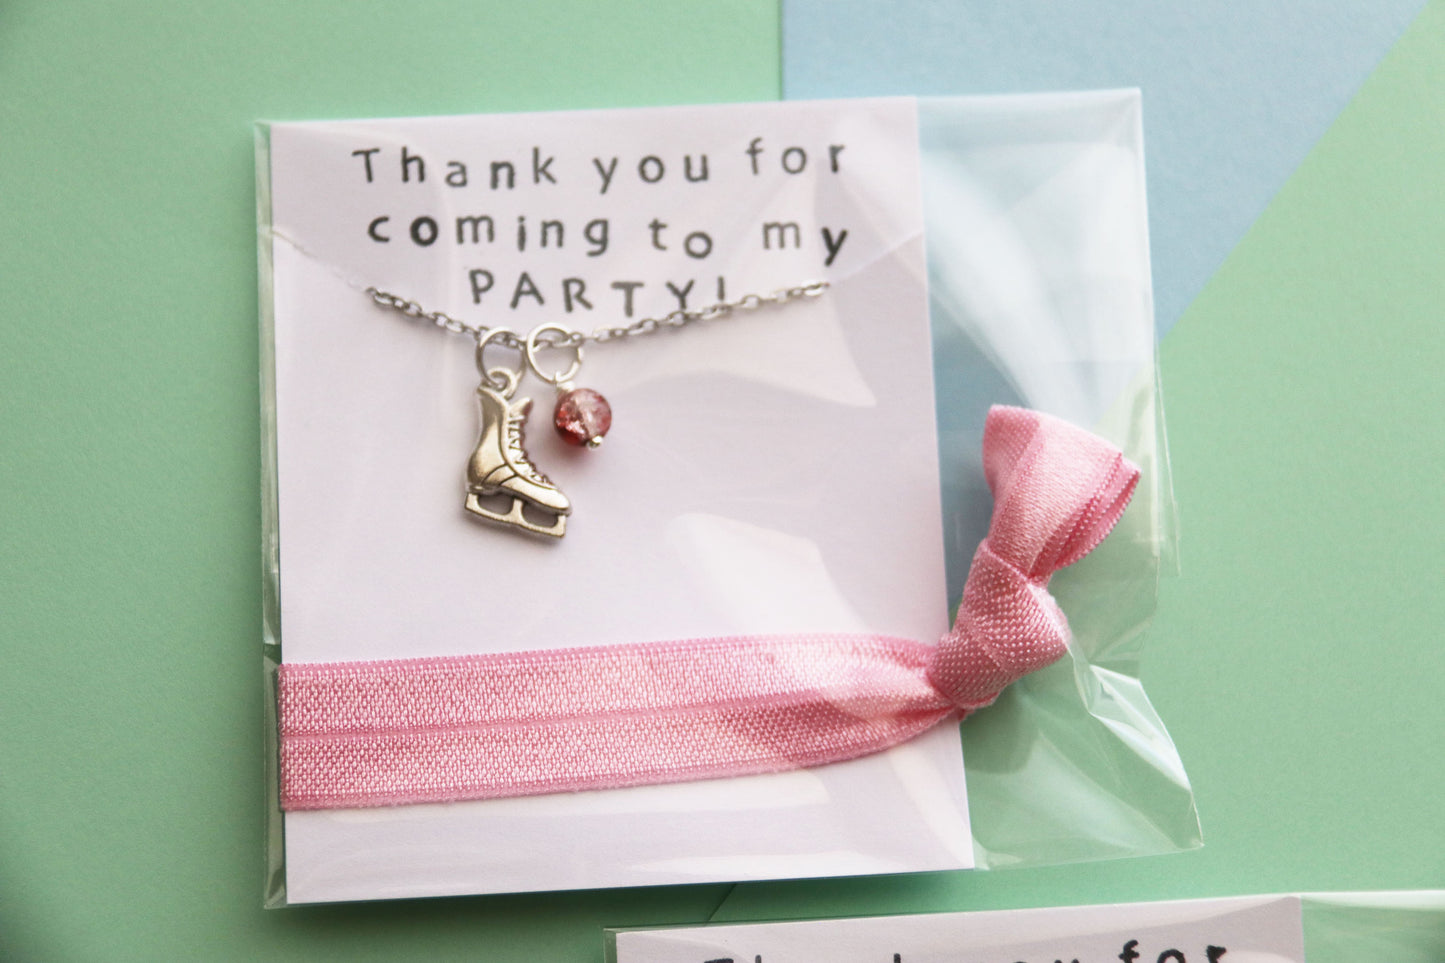 Ice Skate Party Favor Necklace with Hair Tie, Party Favors